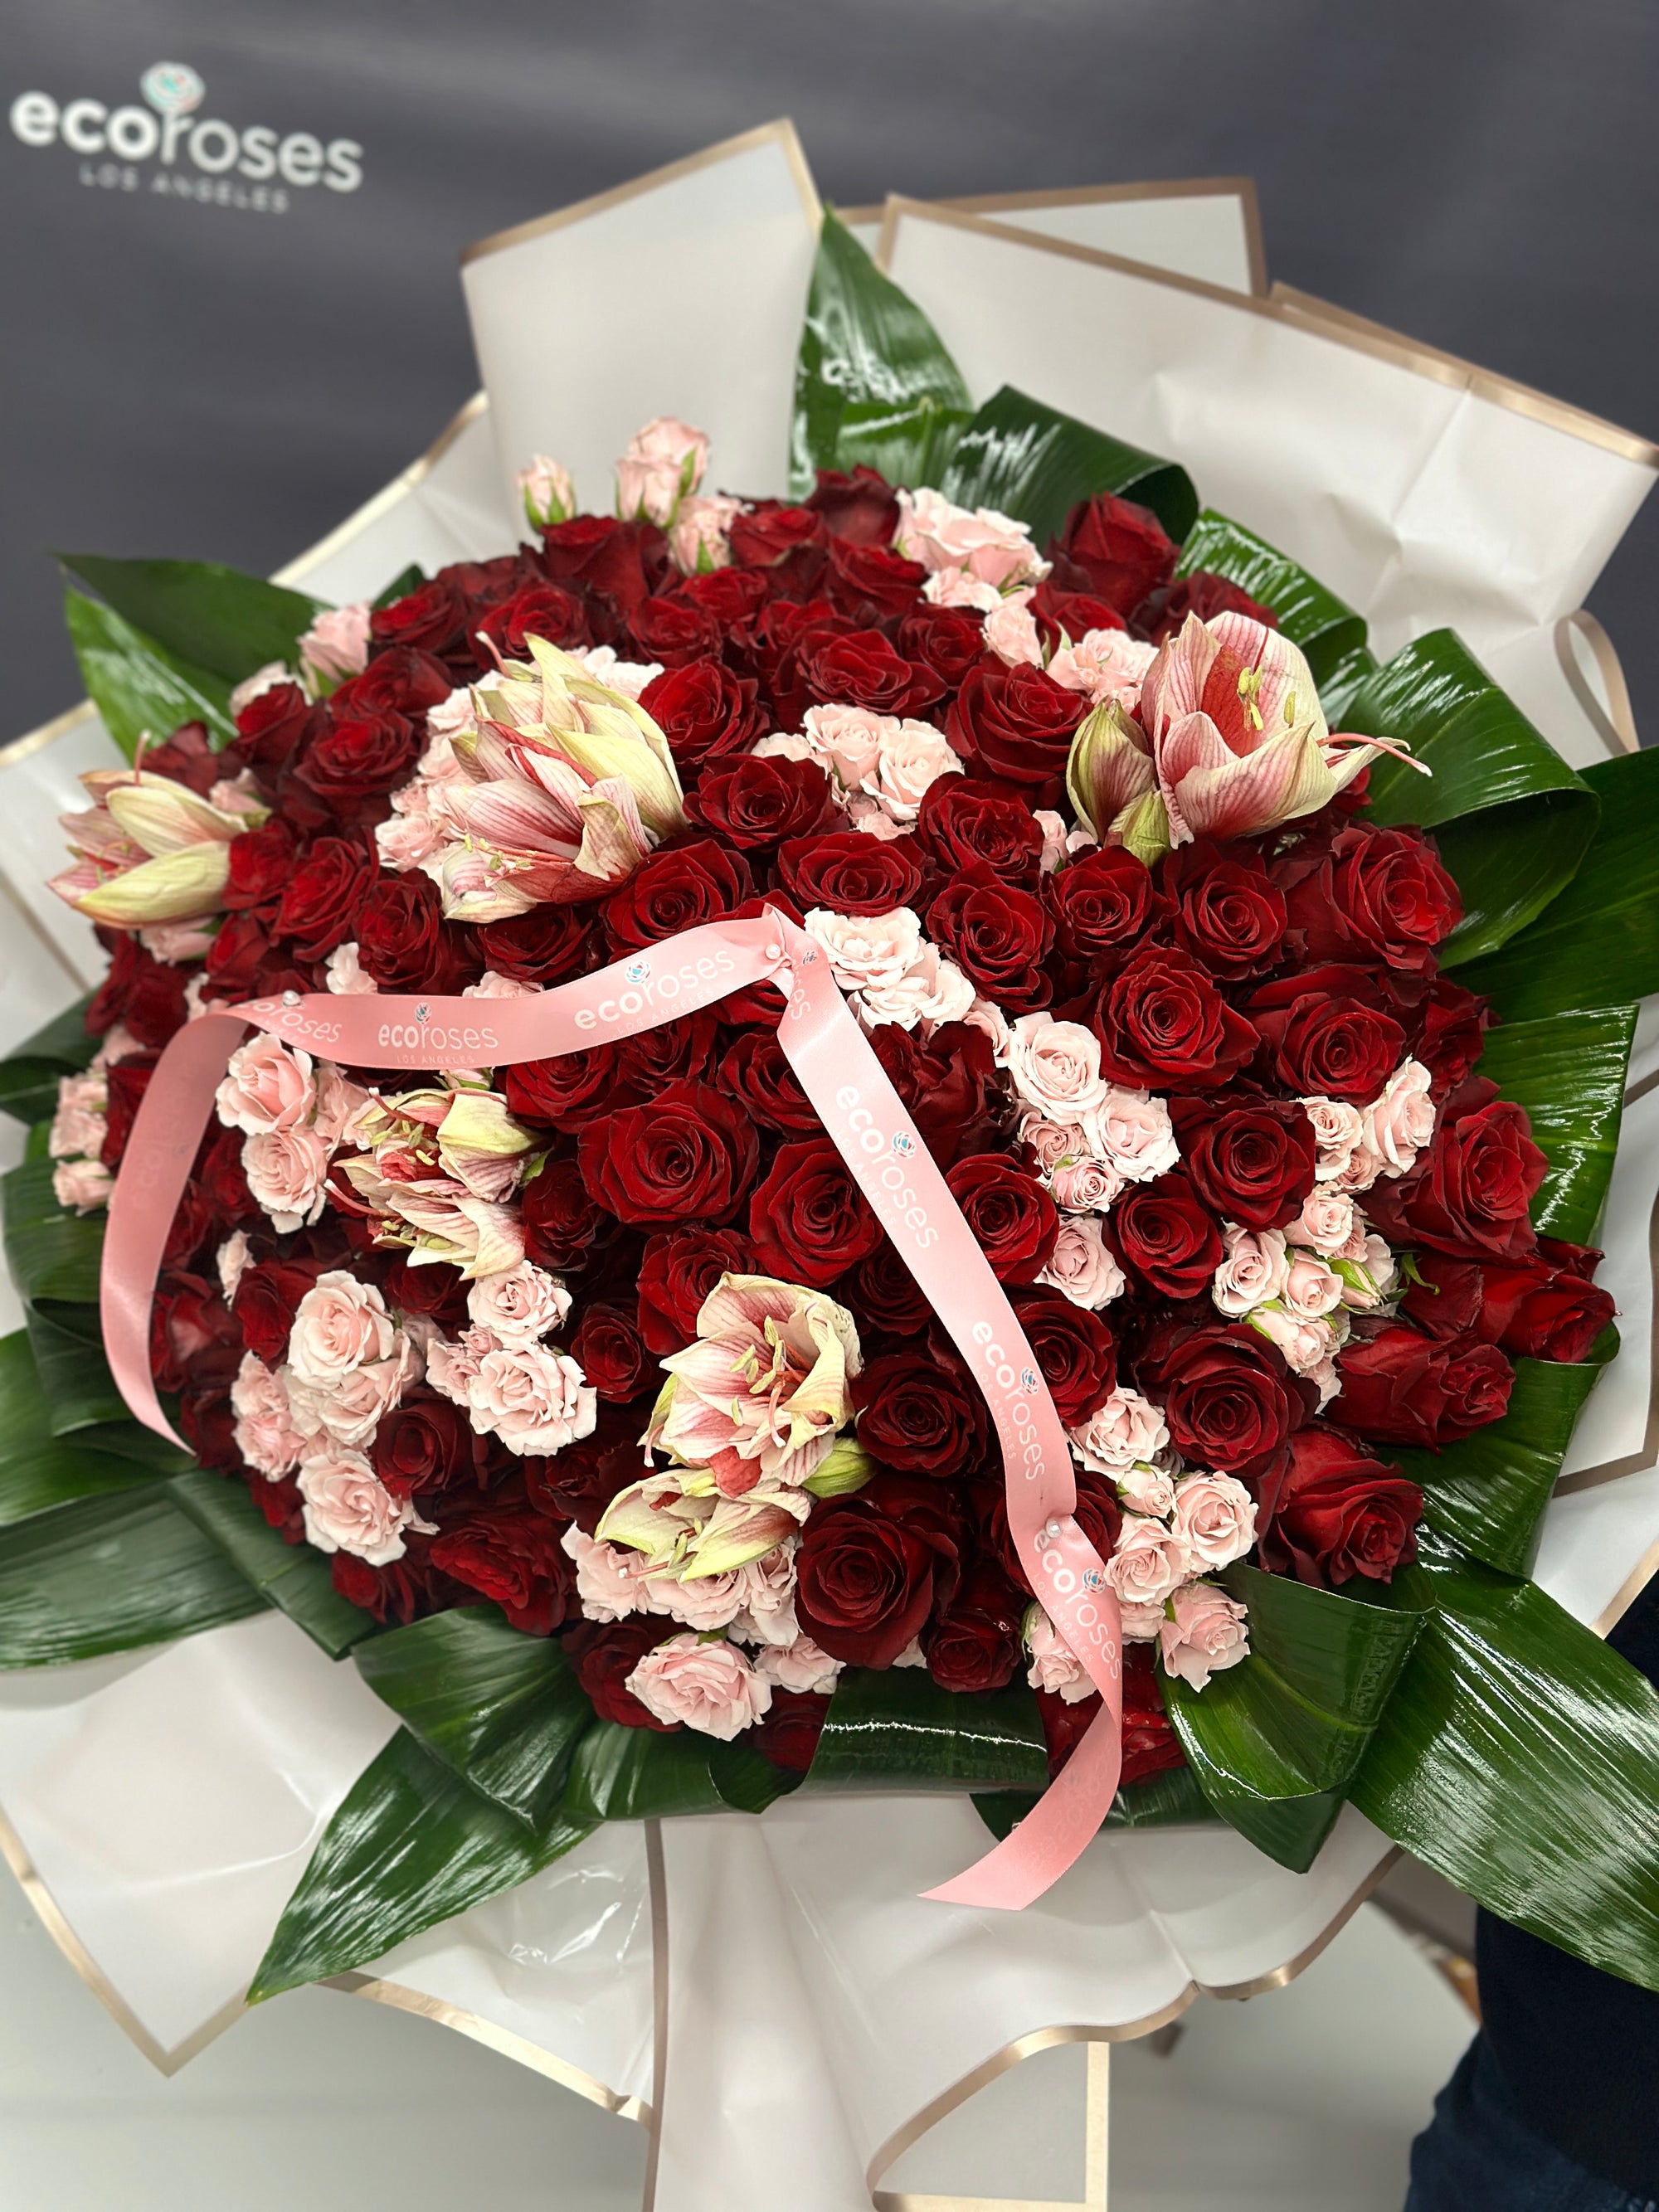 Red Roses LA Crimson Charm bouquet arrangement features beautiful red and pink roses